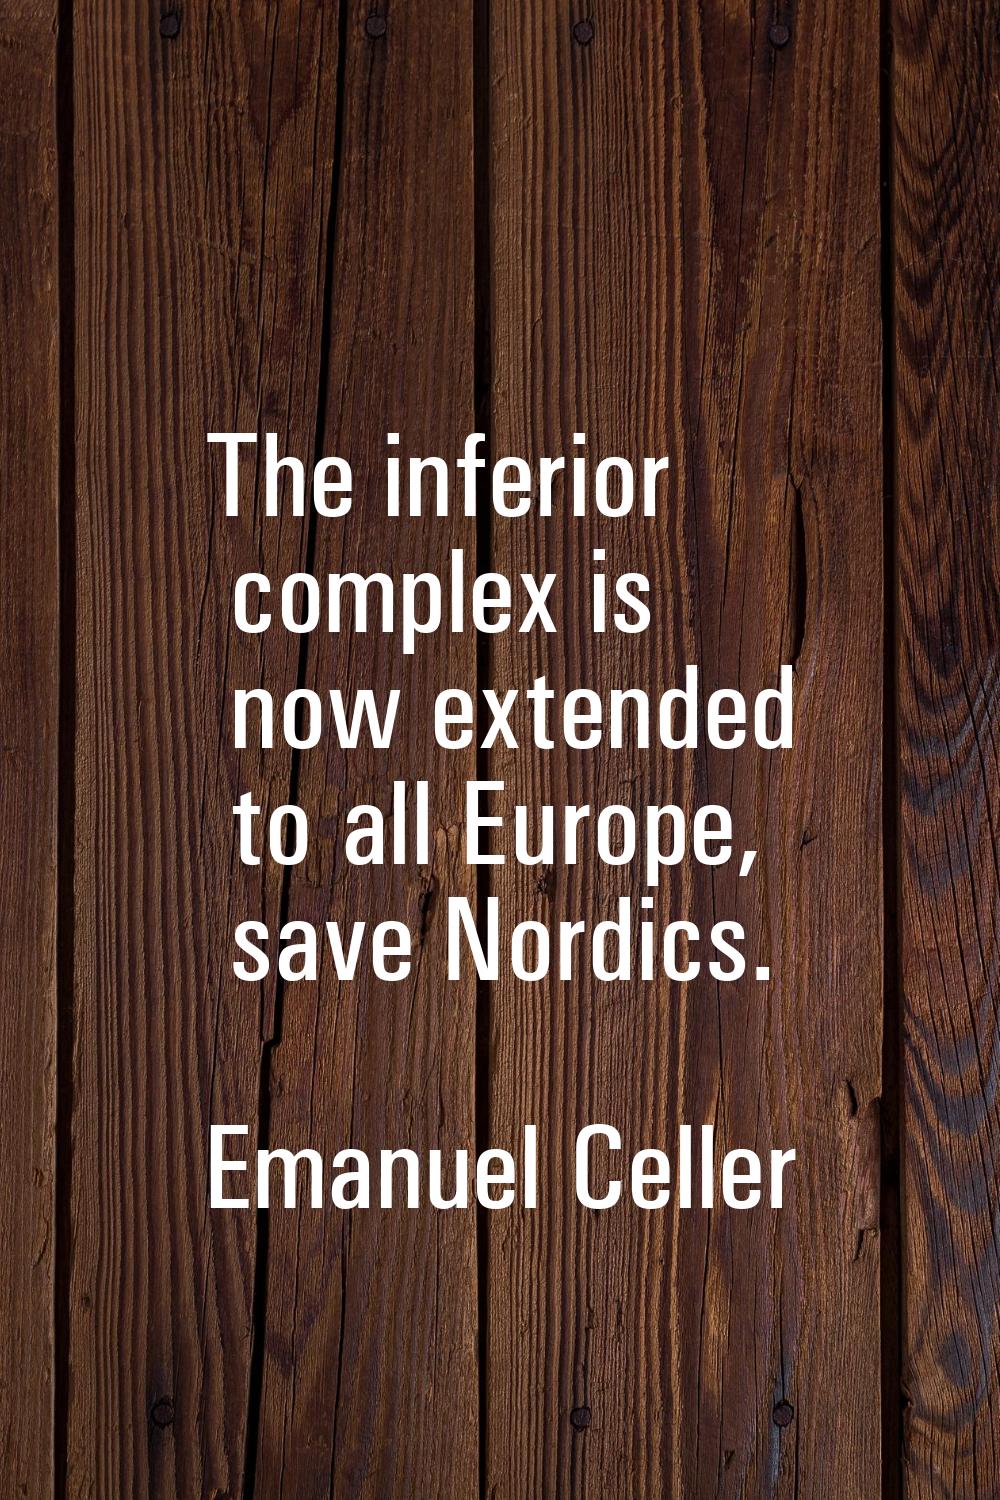 The inferior complex is now extended to all Europe, save Nordics.